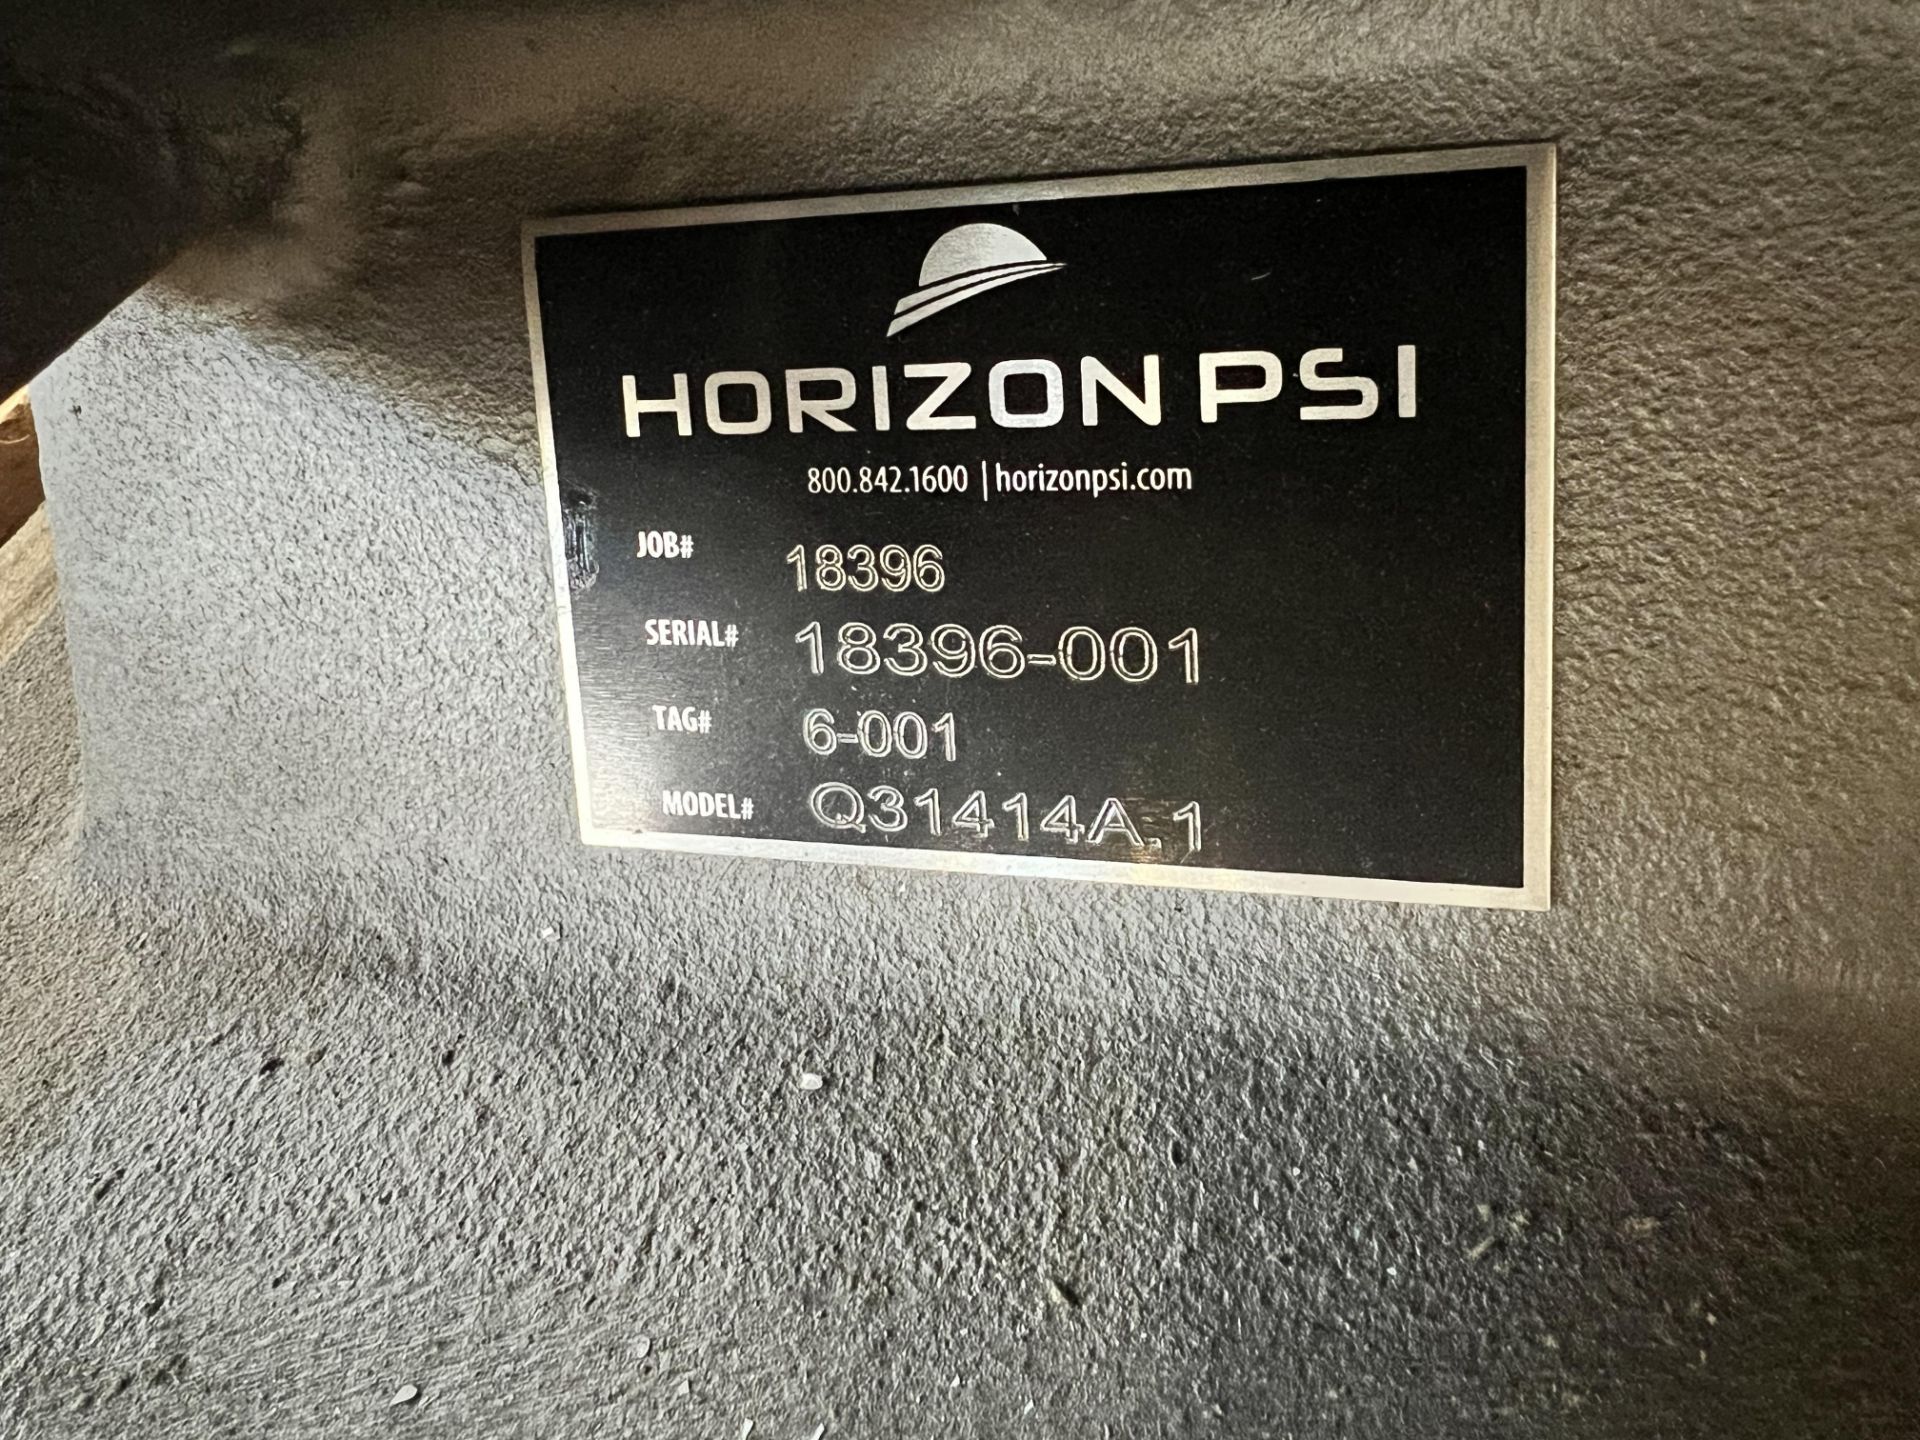 NEW HORIZON SYSTEMS INC ROTARY AIRLOCK VALVE, MODEL Q31414A.1, S/N 18396-001 (SIMPLE LOADING FEE - Image 6 of 7